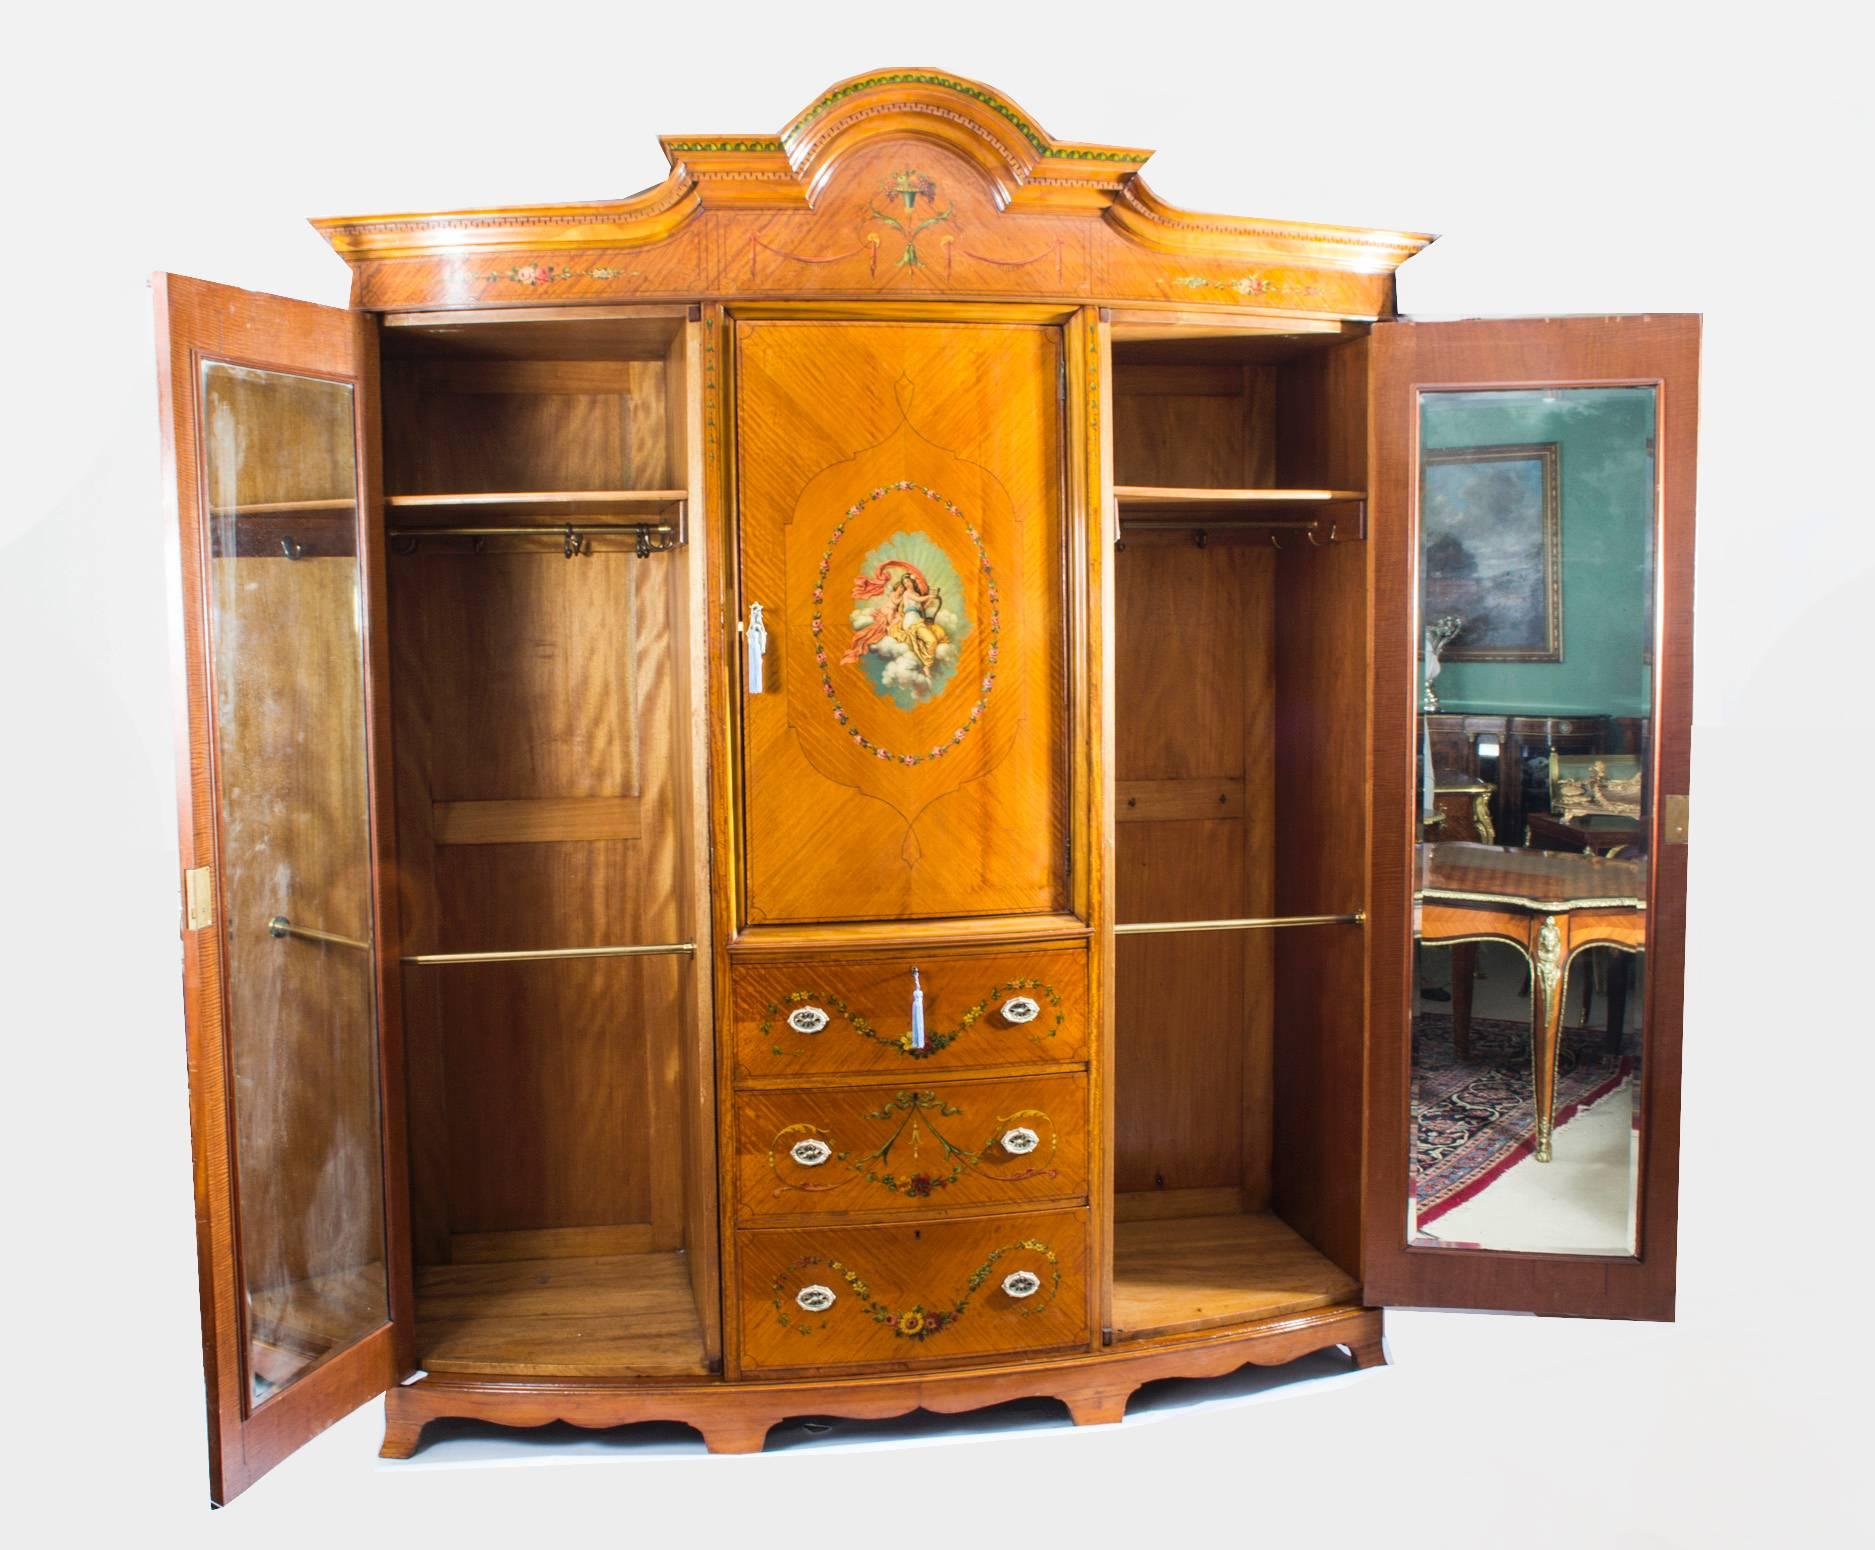 This is a large and impressive English antique Victorian satinwood and hand-painted bow-front wardrobe, circa 1880 in date.

It is of neoclassical design and is beautifully painted, in the manner of Angelica Kauffman with a basket of fruit, musical